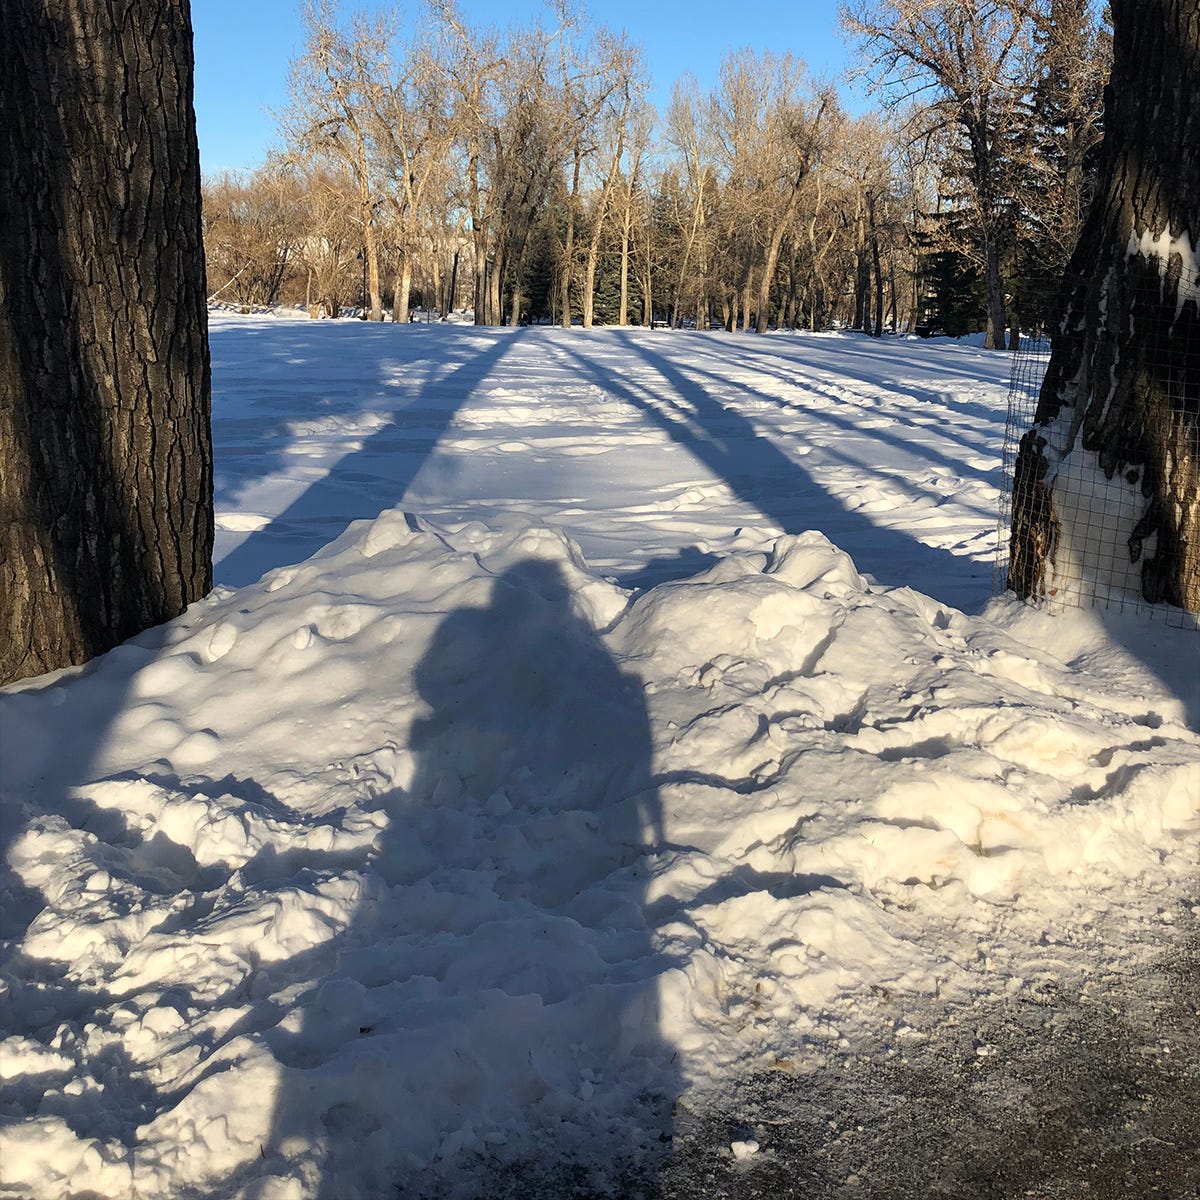 Shadow of Athena in her wheelchair falls across the snow.